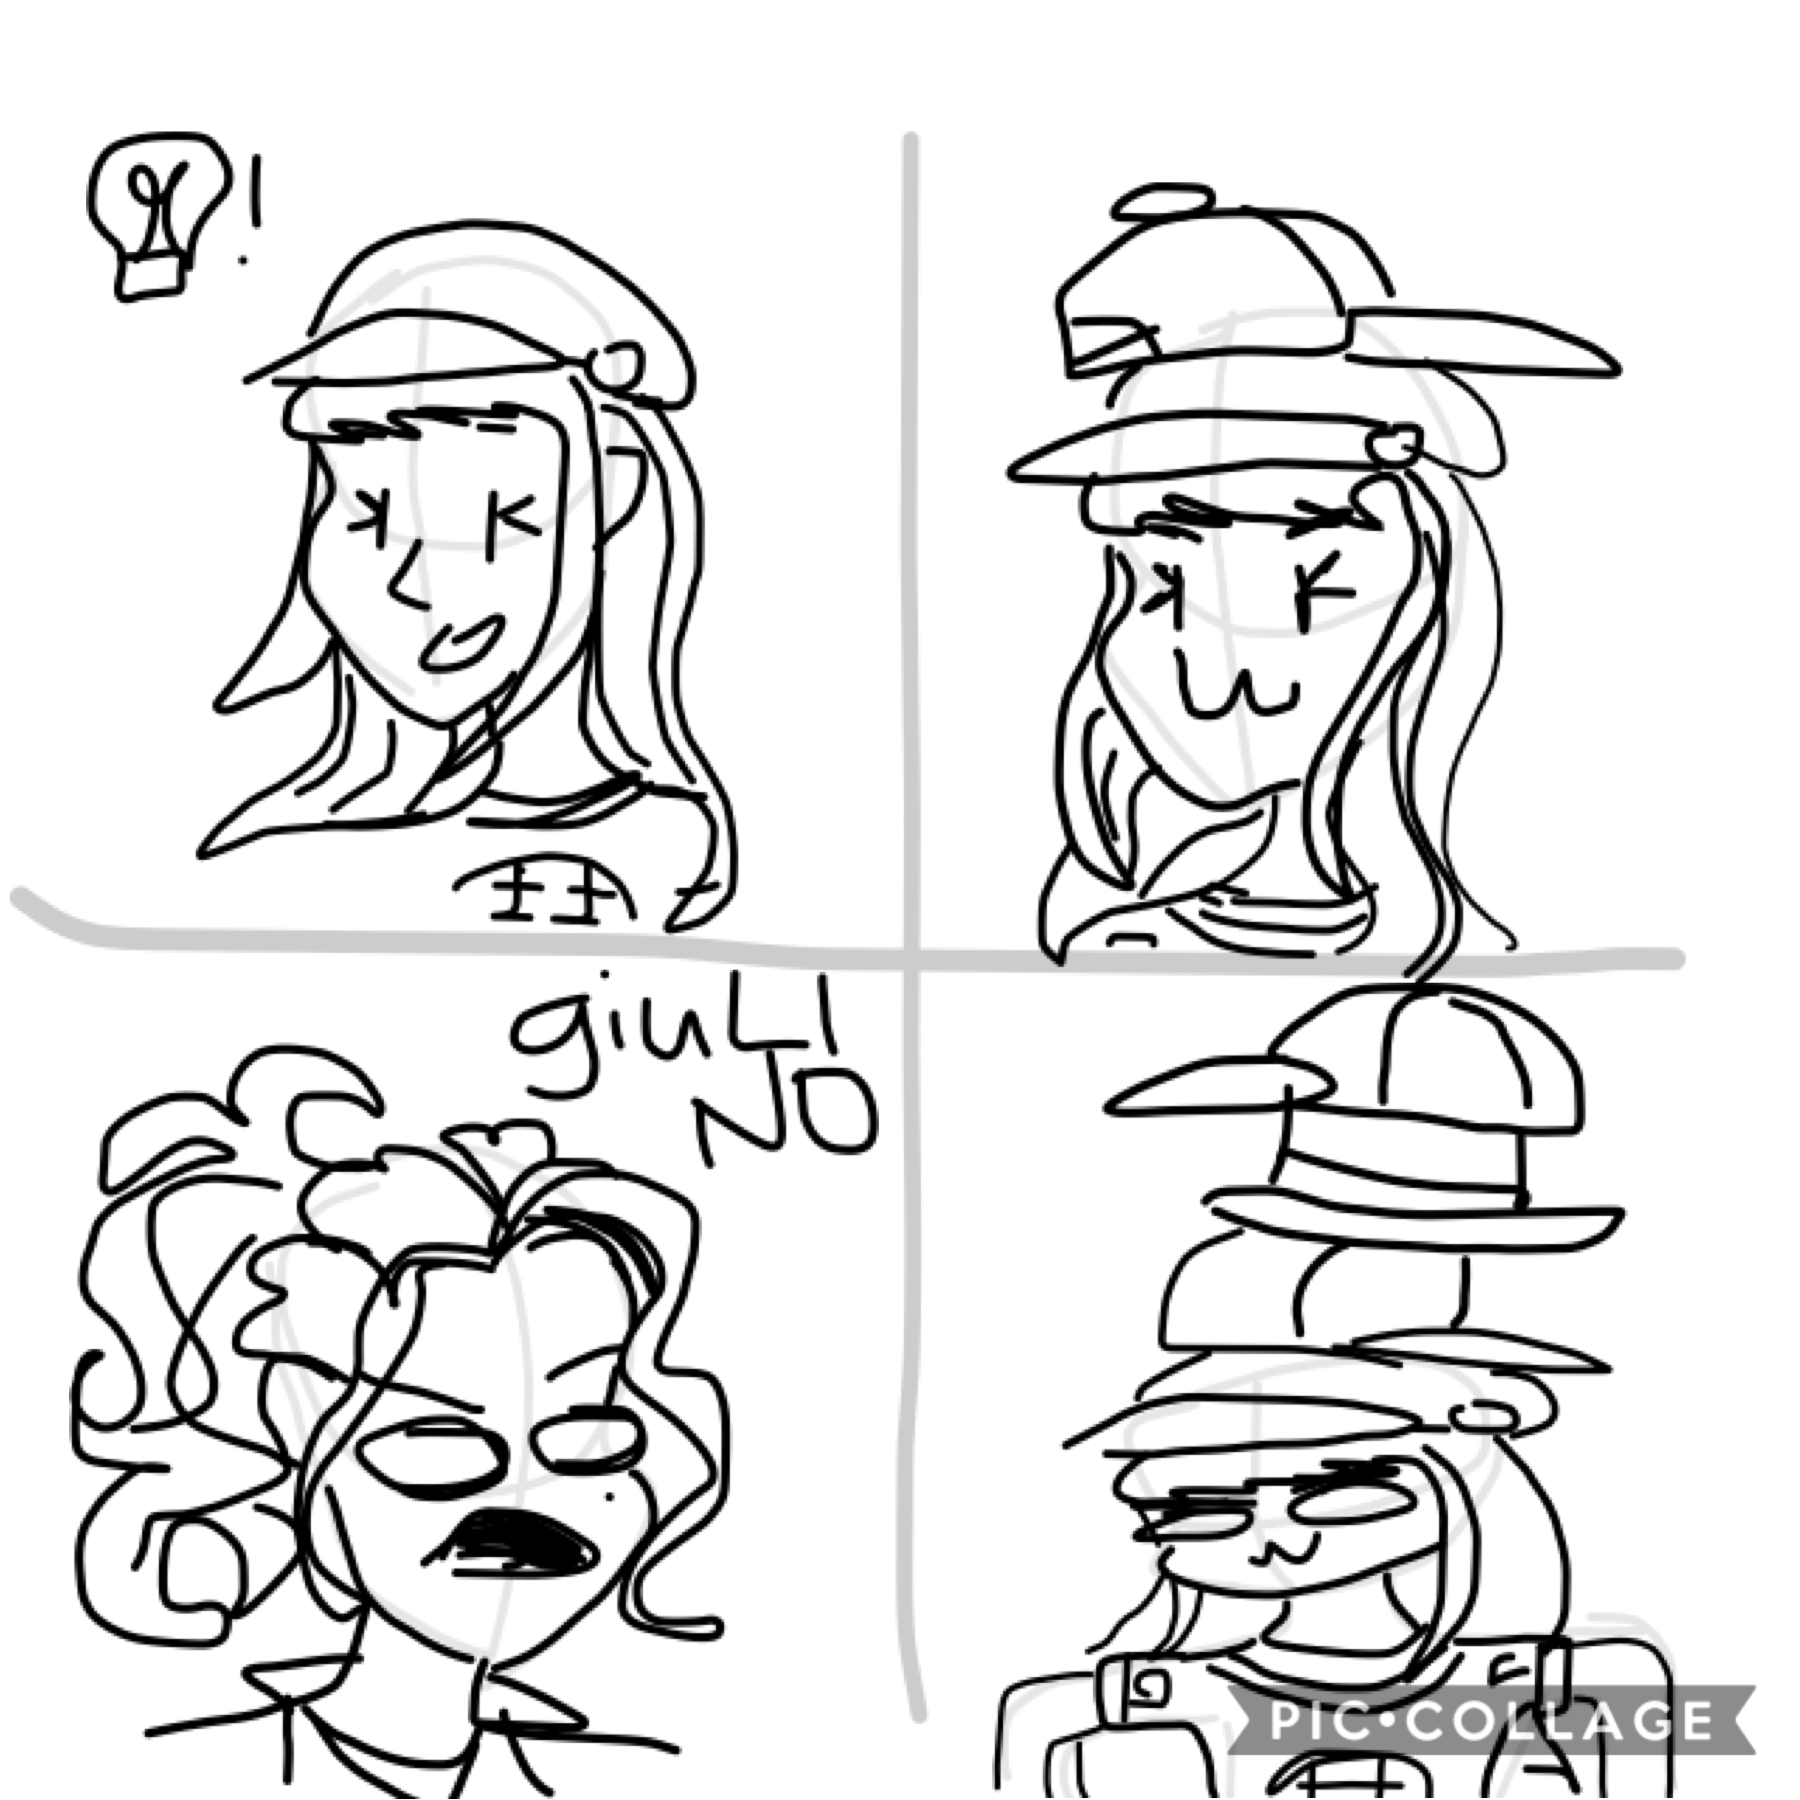 giuli lieks hats (tap)

she wouldn’t be caught deäd without a hat, so why not wear four of them lmaø. val tried to stop her, but giuli has an addiction now oop